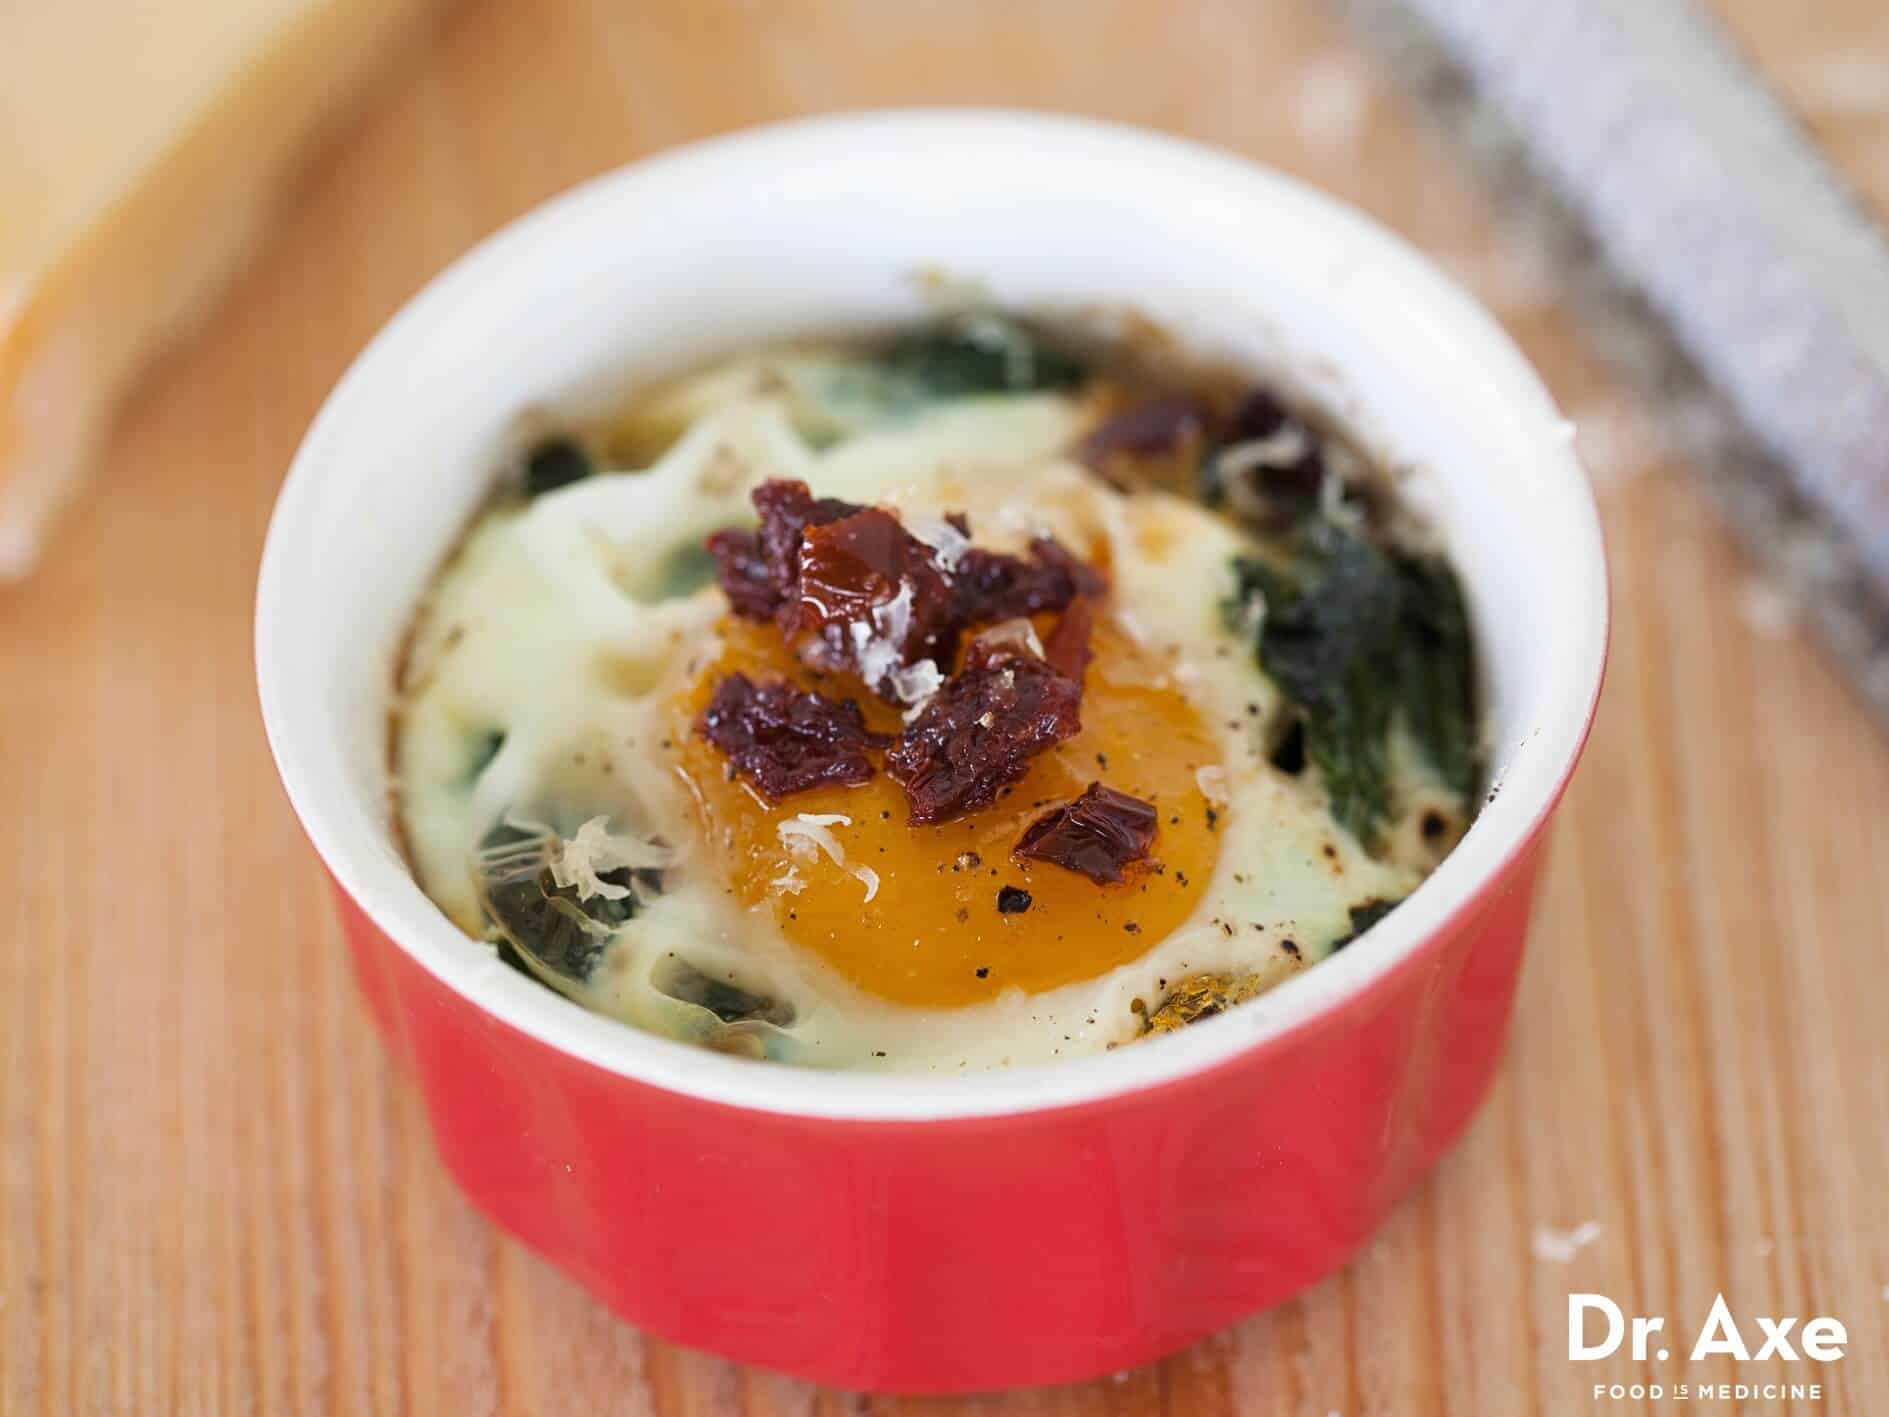 Baked eggs and spinach recipe - Dr. Axe